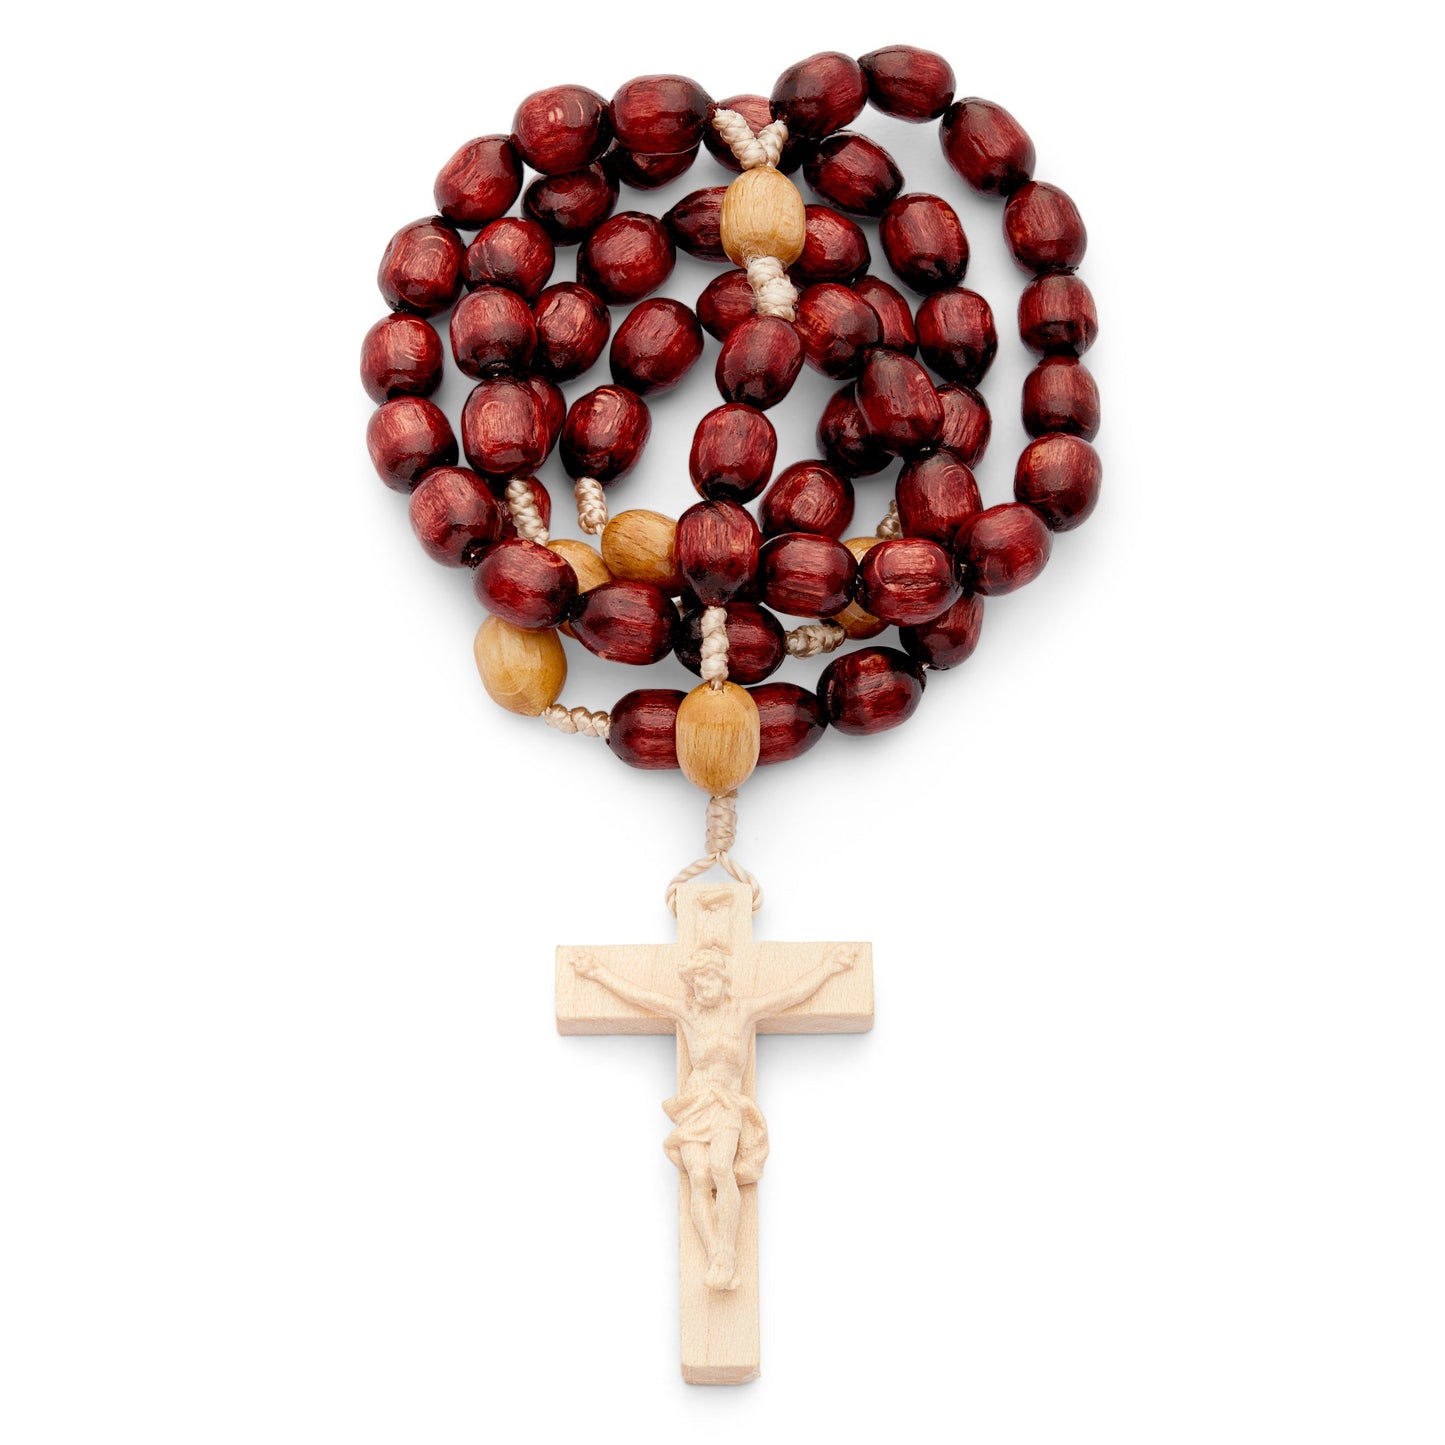 MONDO CATTOLICO Prayer Beads 48 cm (18.9 in) / 10 mm (0.39 in) Rosary in rope with Natural Wood Oval Shape Beads